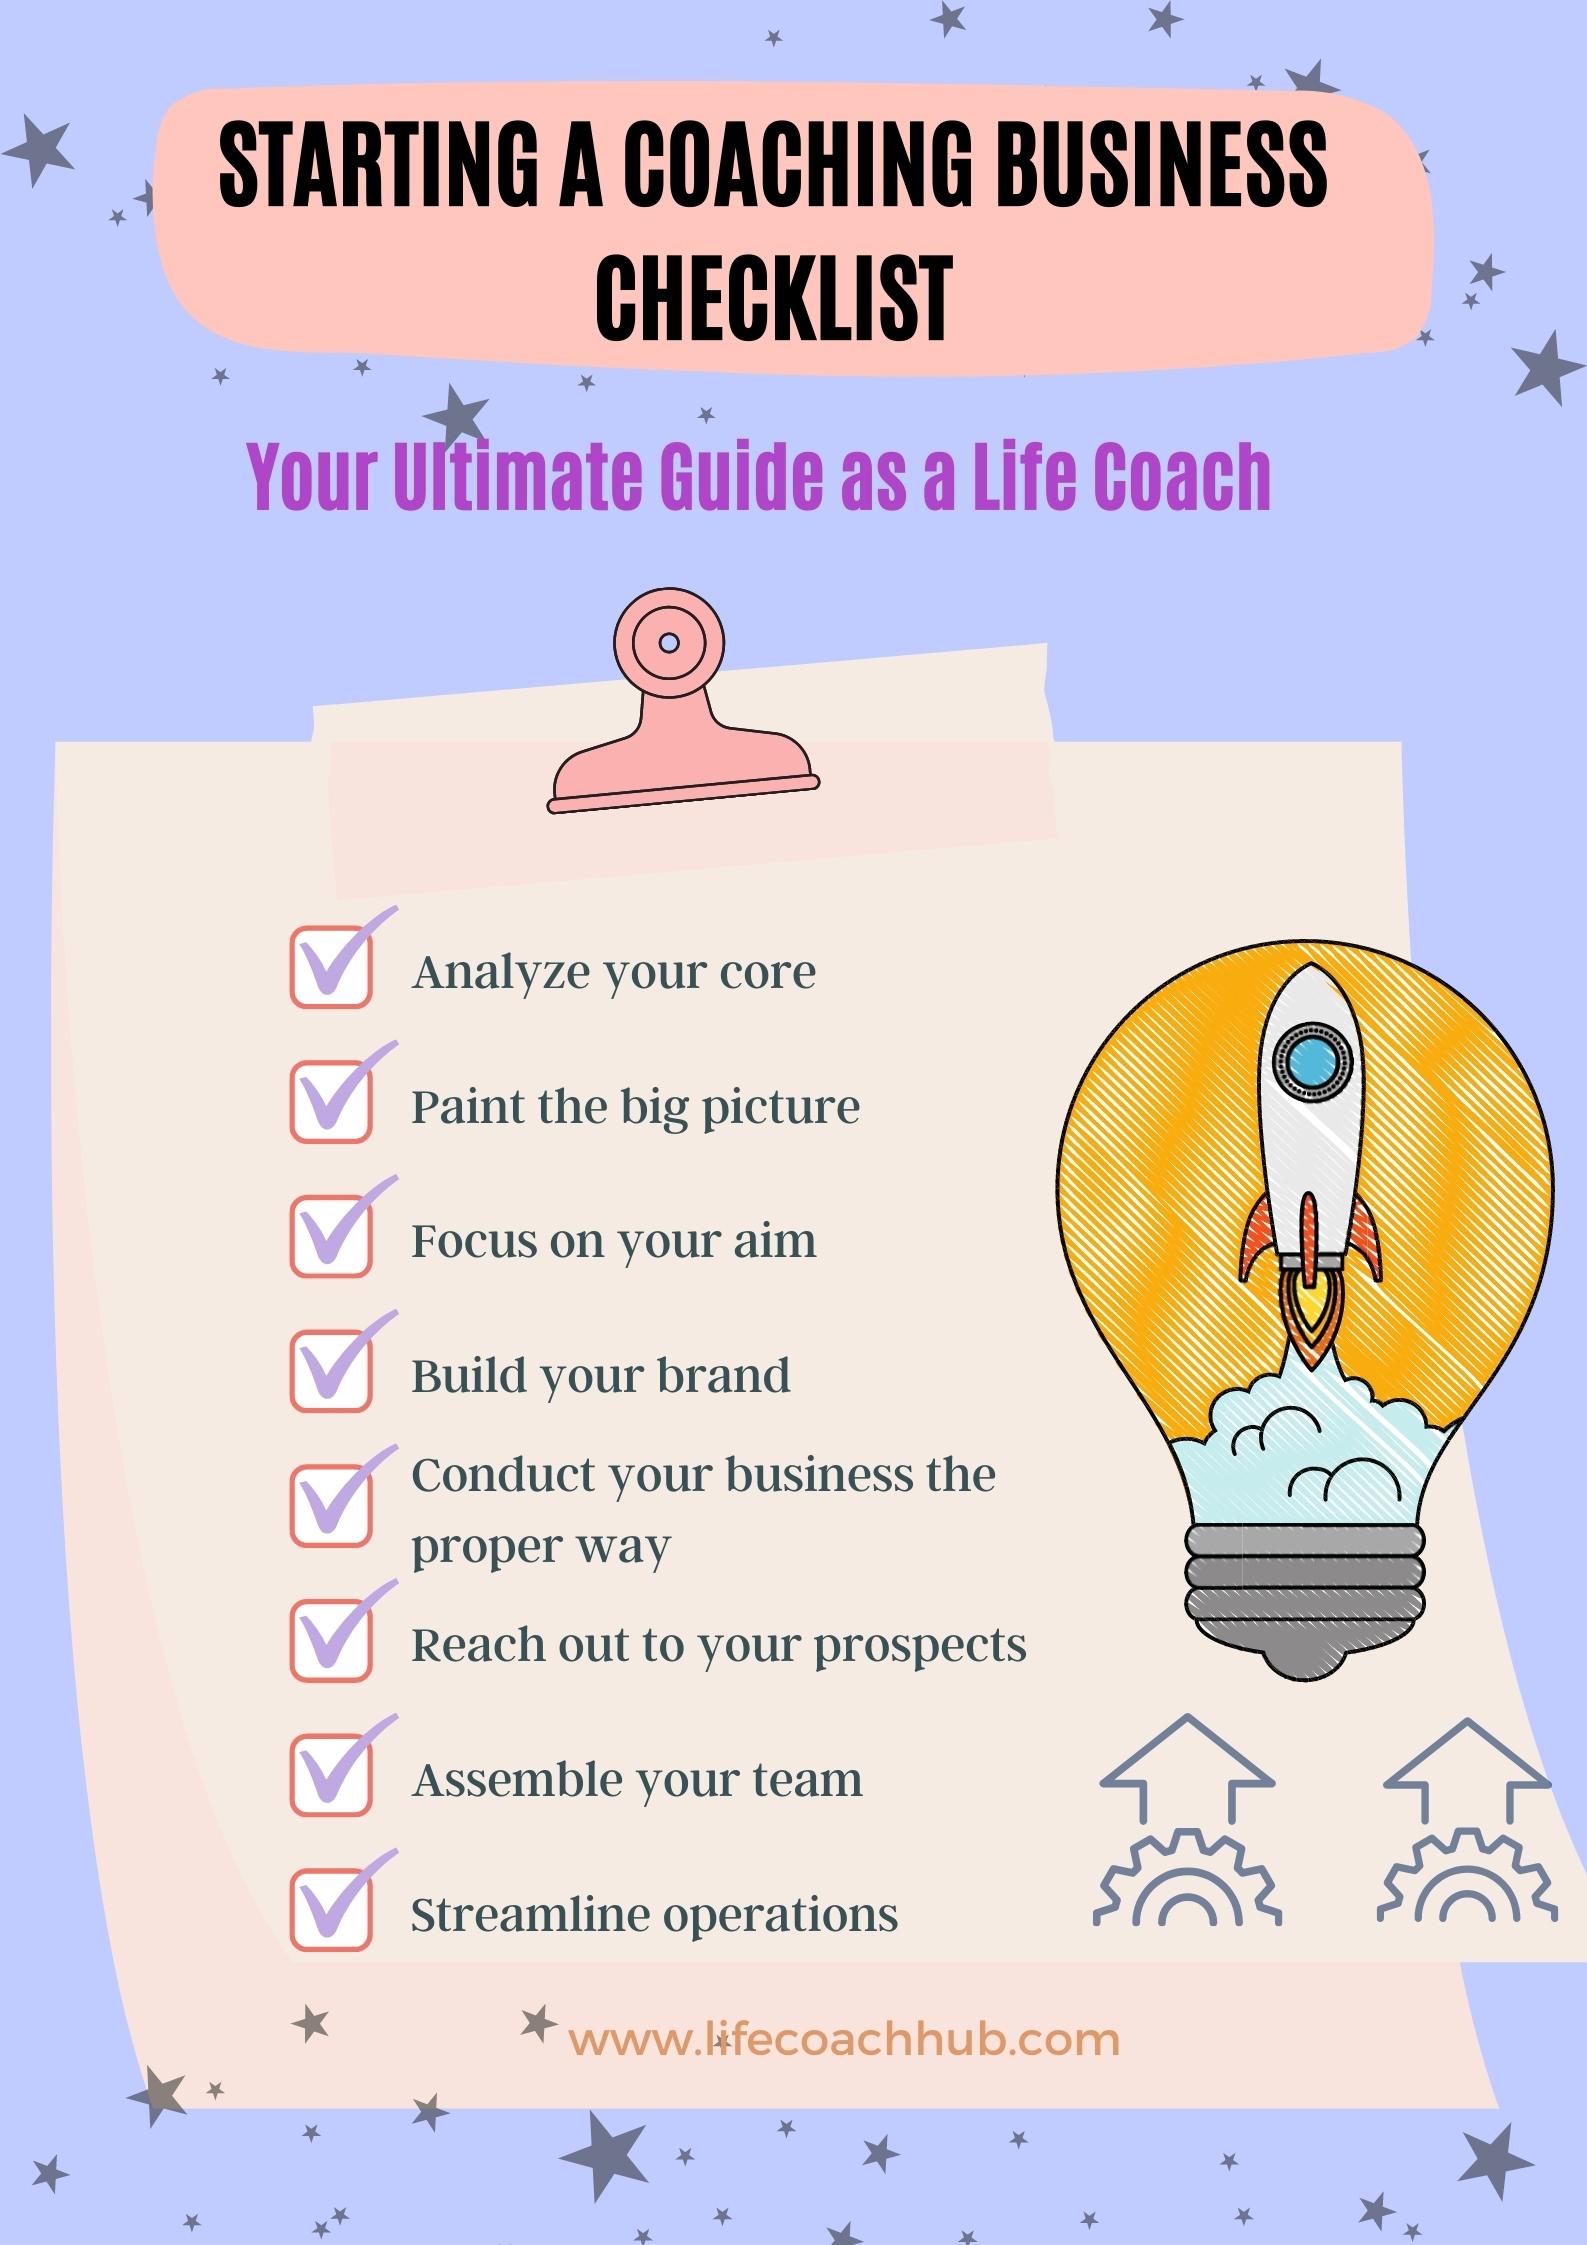 Starting a coaching business checklist